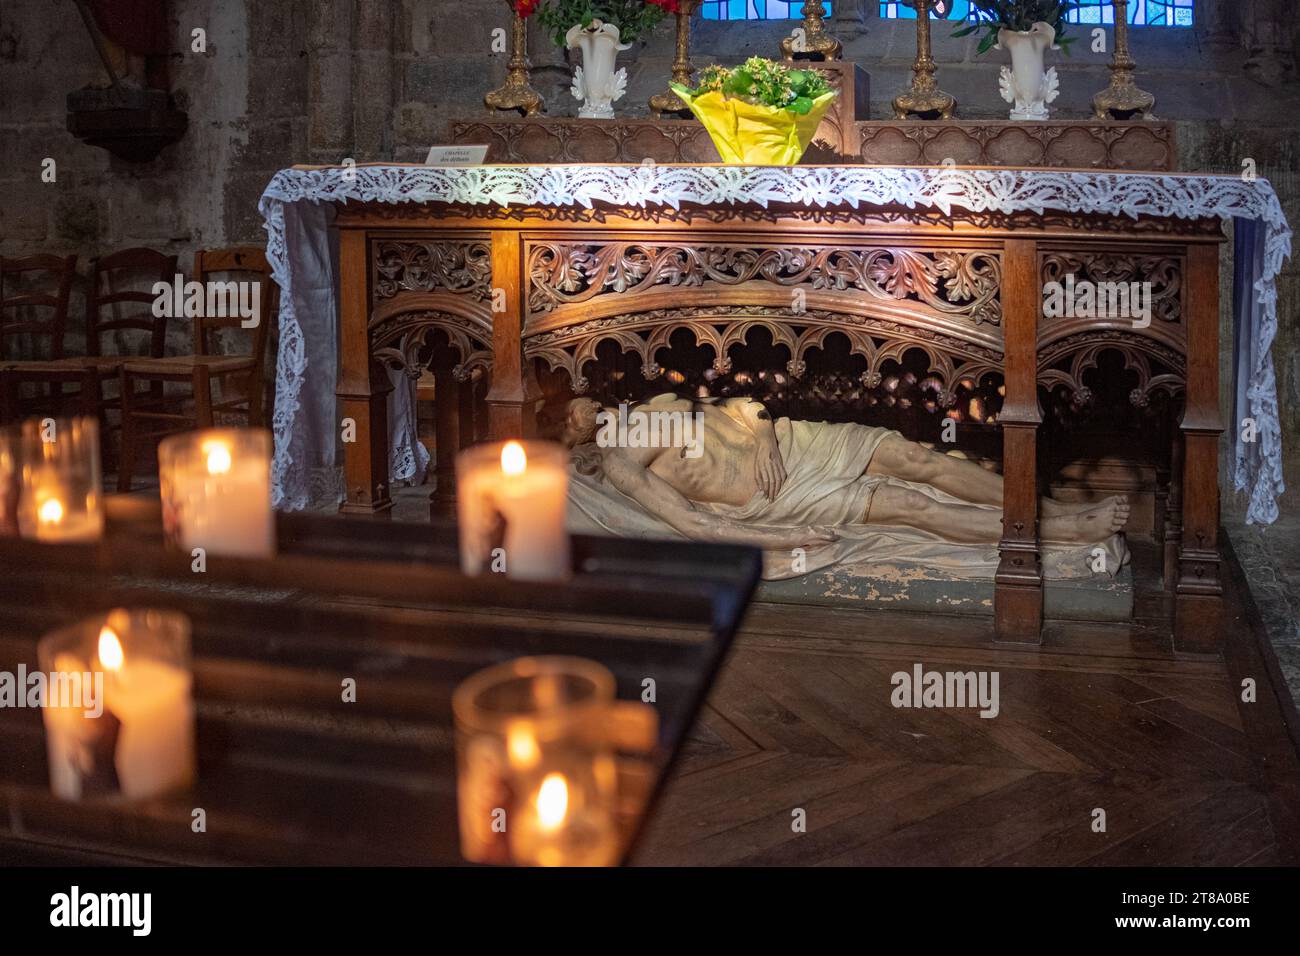 Inside view of a tomb effigy at the cathedral Saint-Tugdual of Treguier. With no people Stock Photo